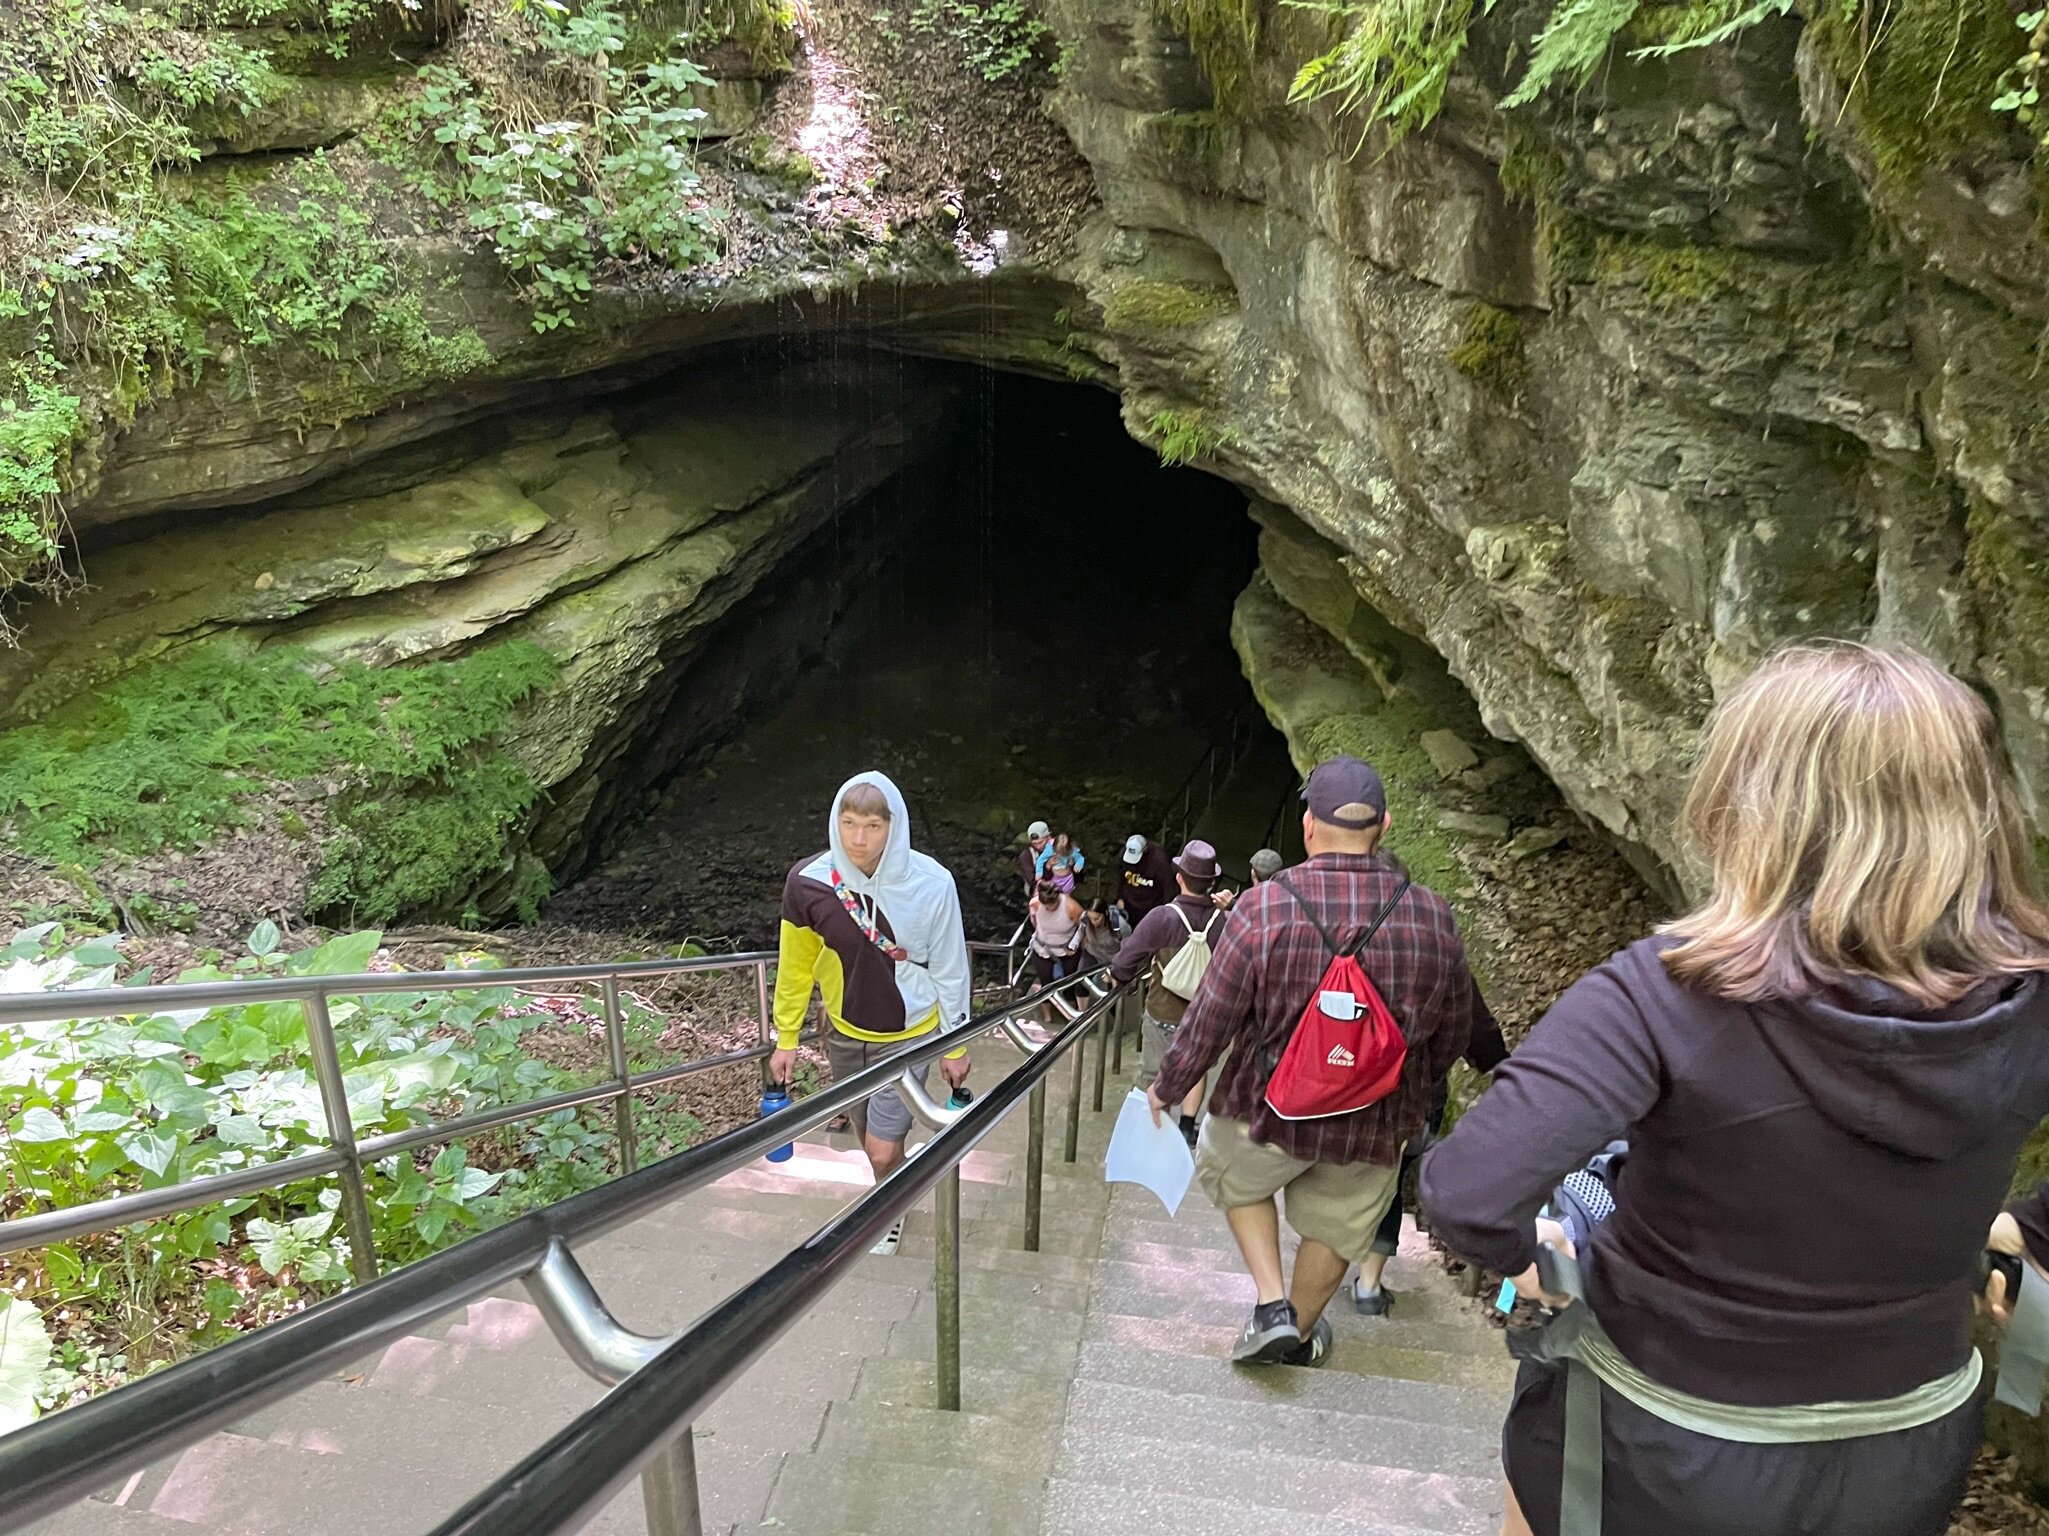   Mammoth Cave National Park  has been one of the highlights so far! Who knew the largest cave system in the WORLD is right here in Kentucky? The Mammoth Cave network consists of over 400 miles of caves, and they are still discovering more. This main